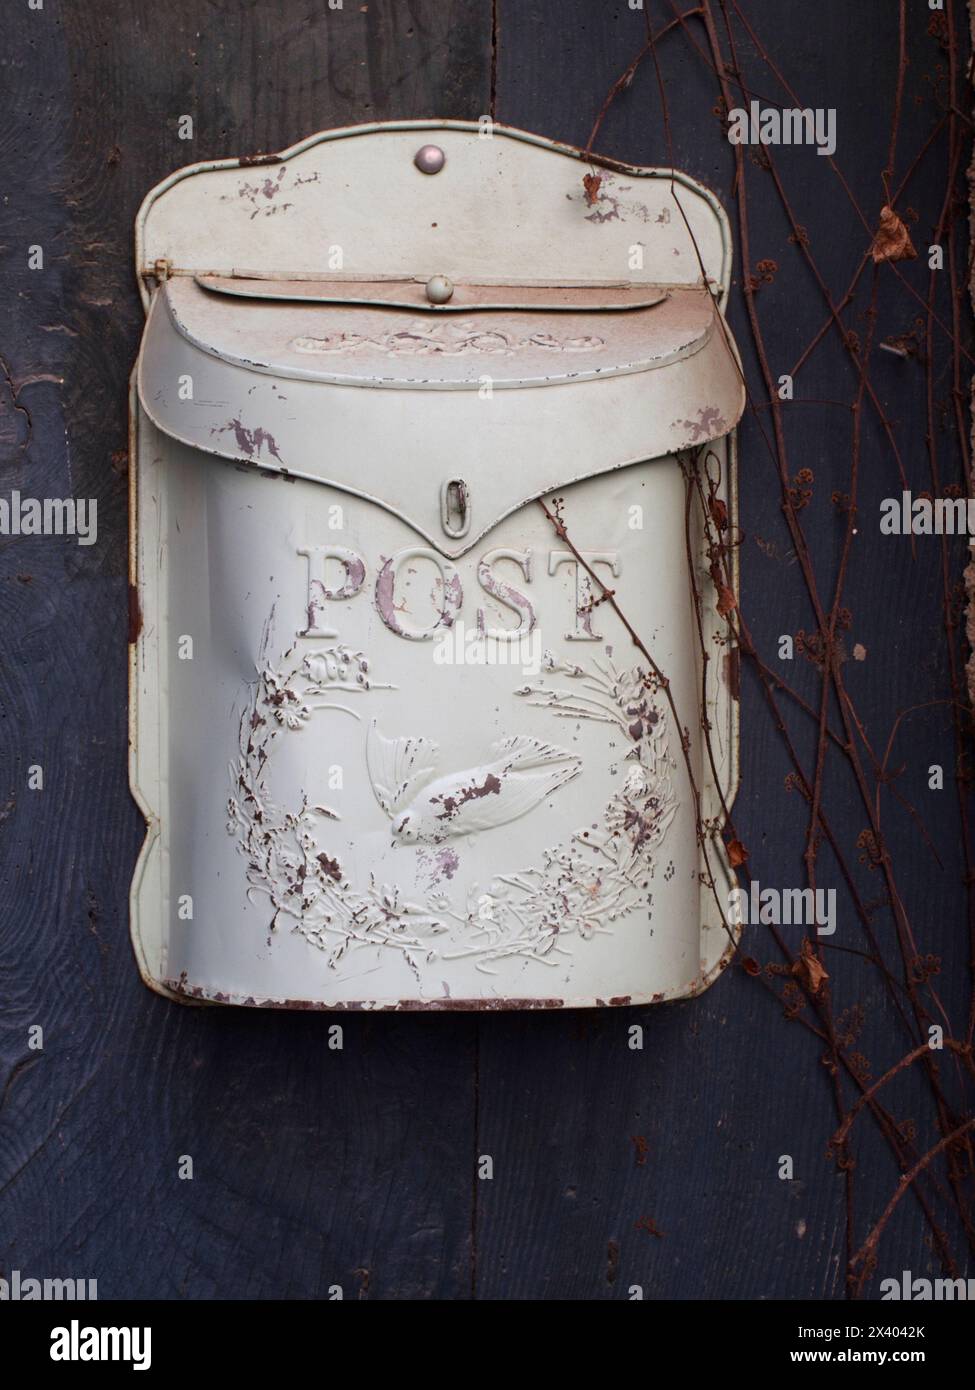 A worn white post box with a swift bird engraving on a dark door, Lourmarin, Provence, France Stock Photo